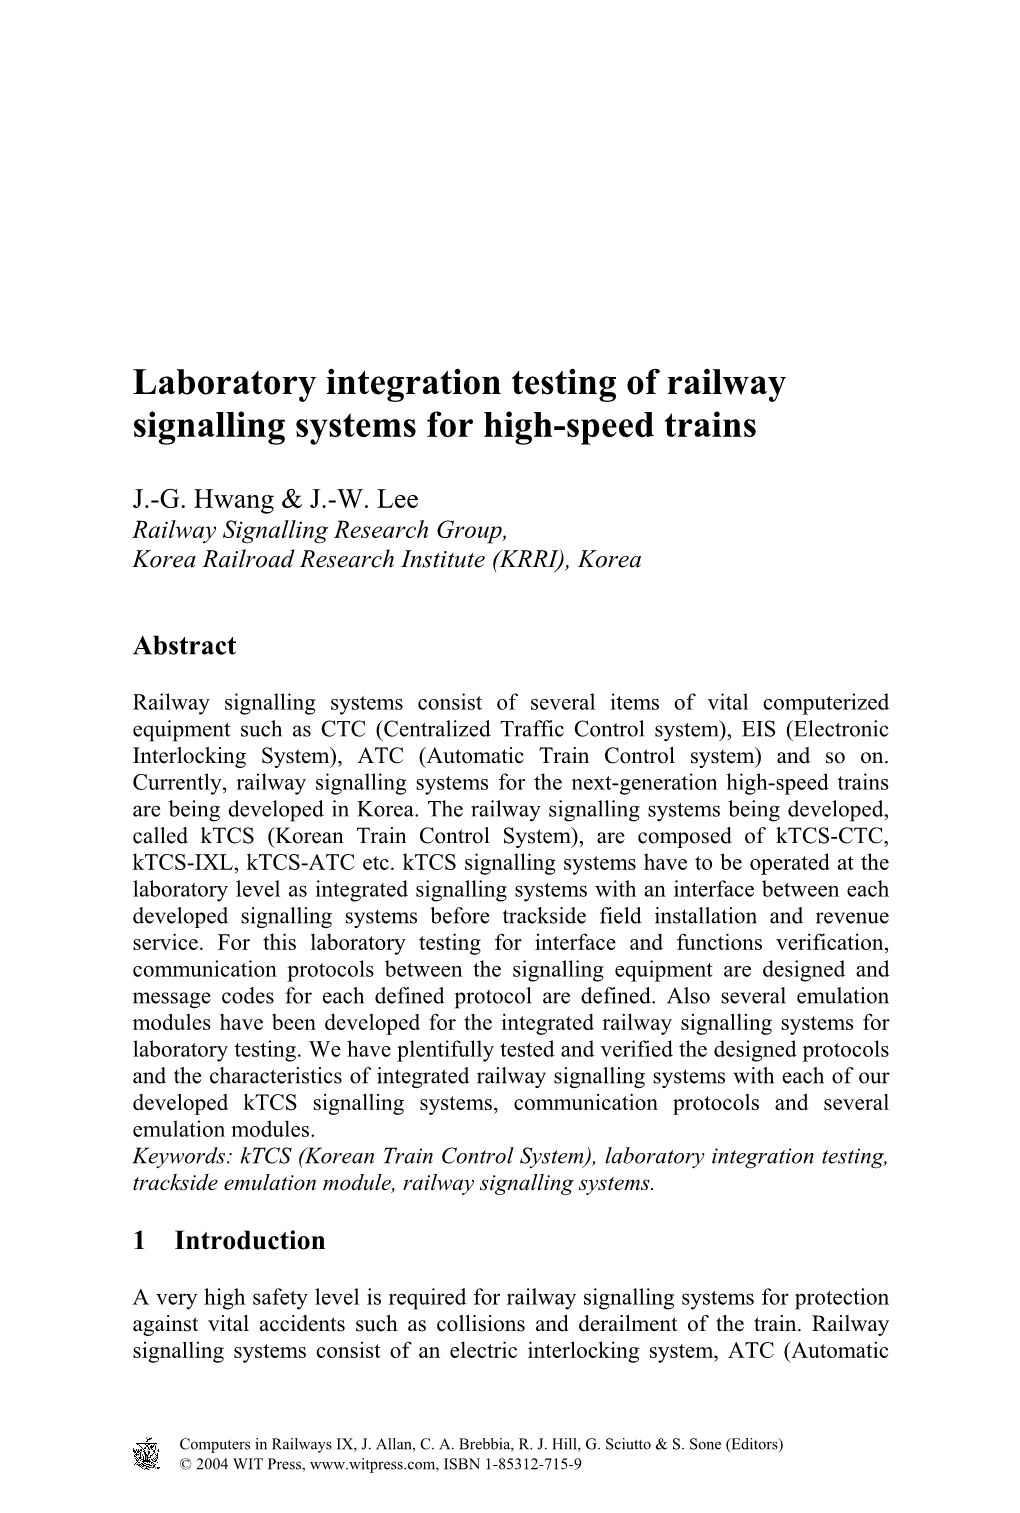 Laboratory Integration Testing of Railway Signalling Systems for High-Speed Trains